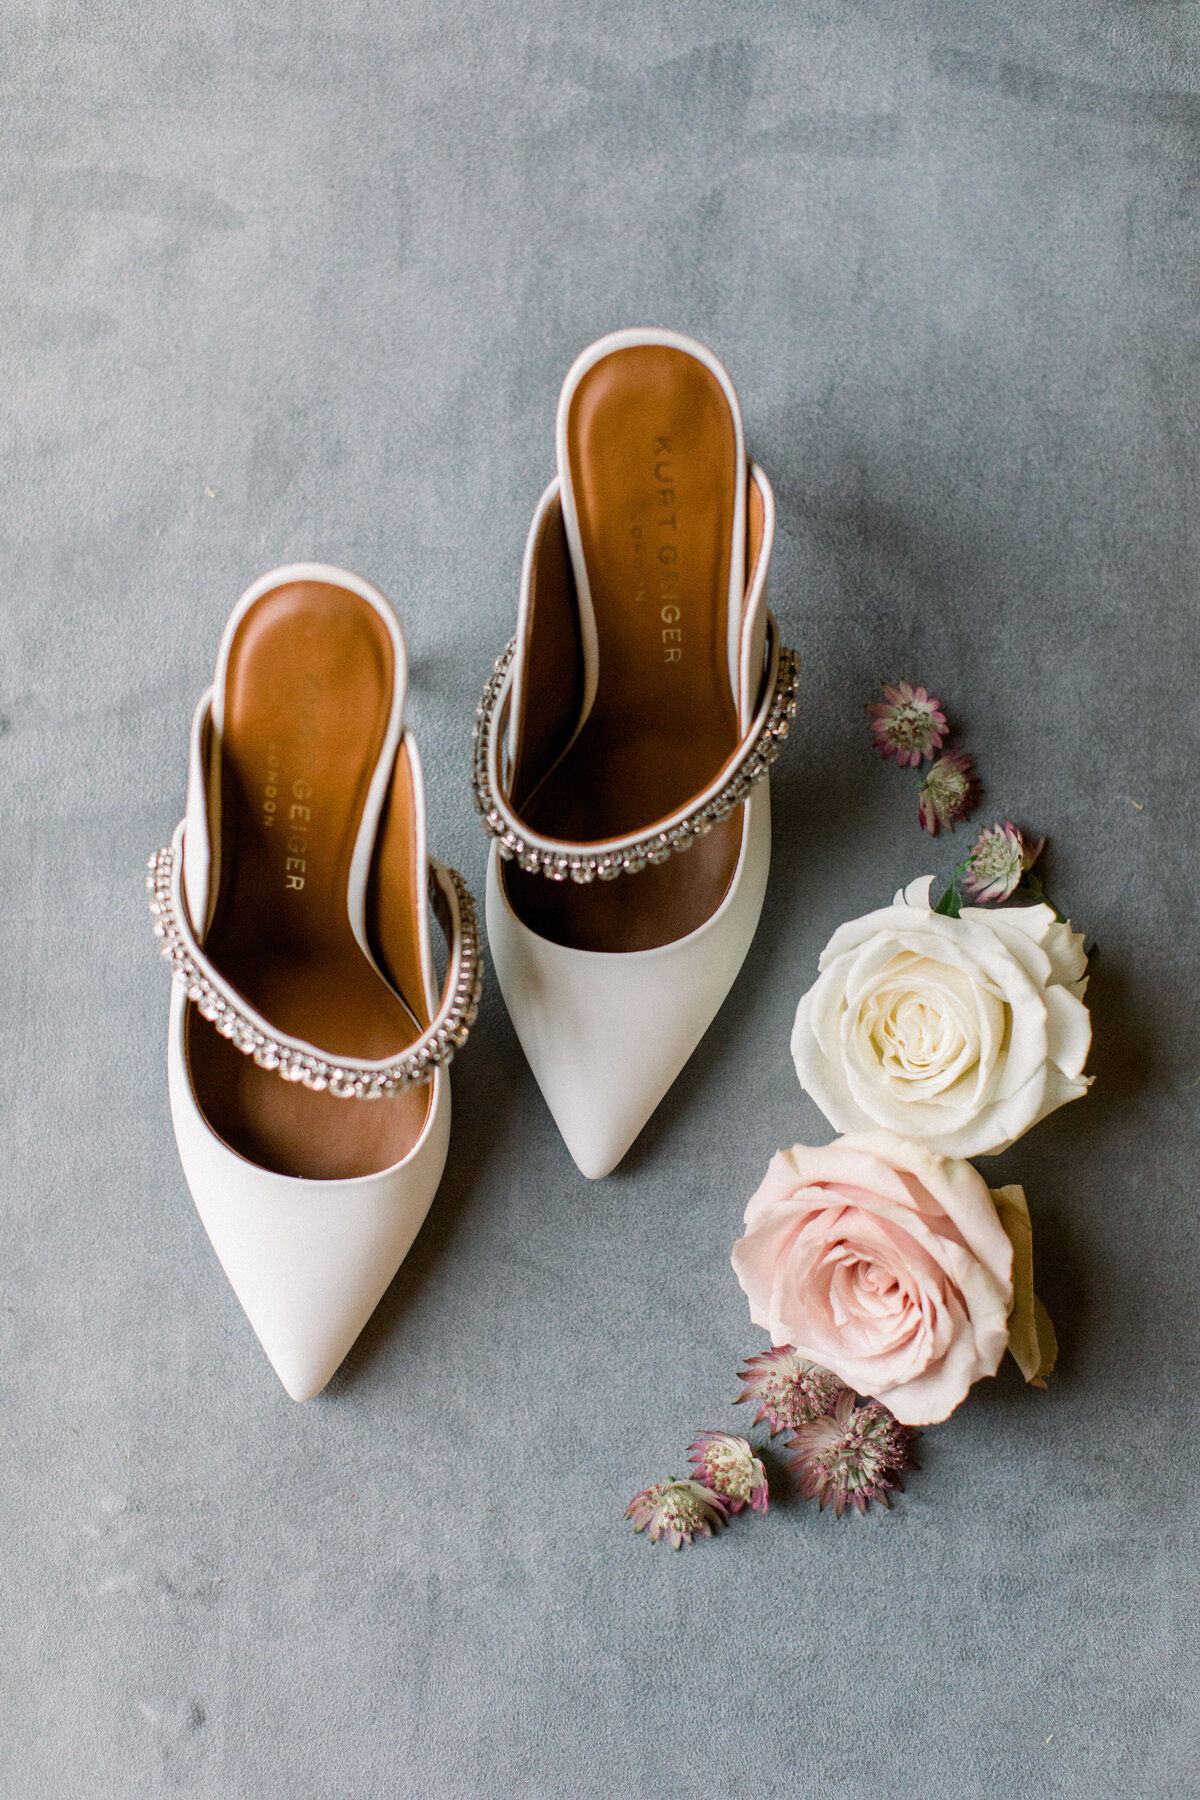 wedding shoes and roses for New Years Eve wedding at the Lyman Estate in Waltham Massachusetts.